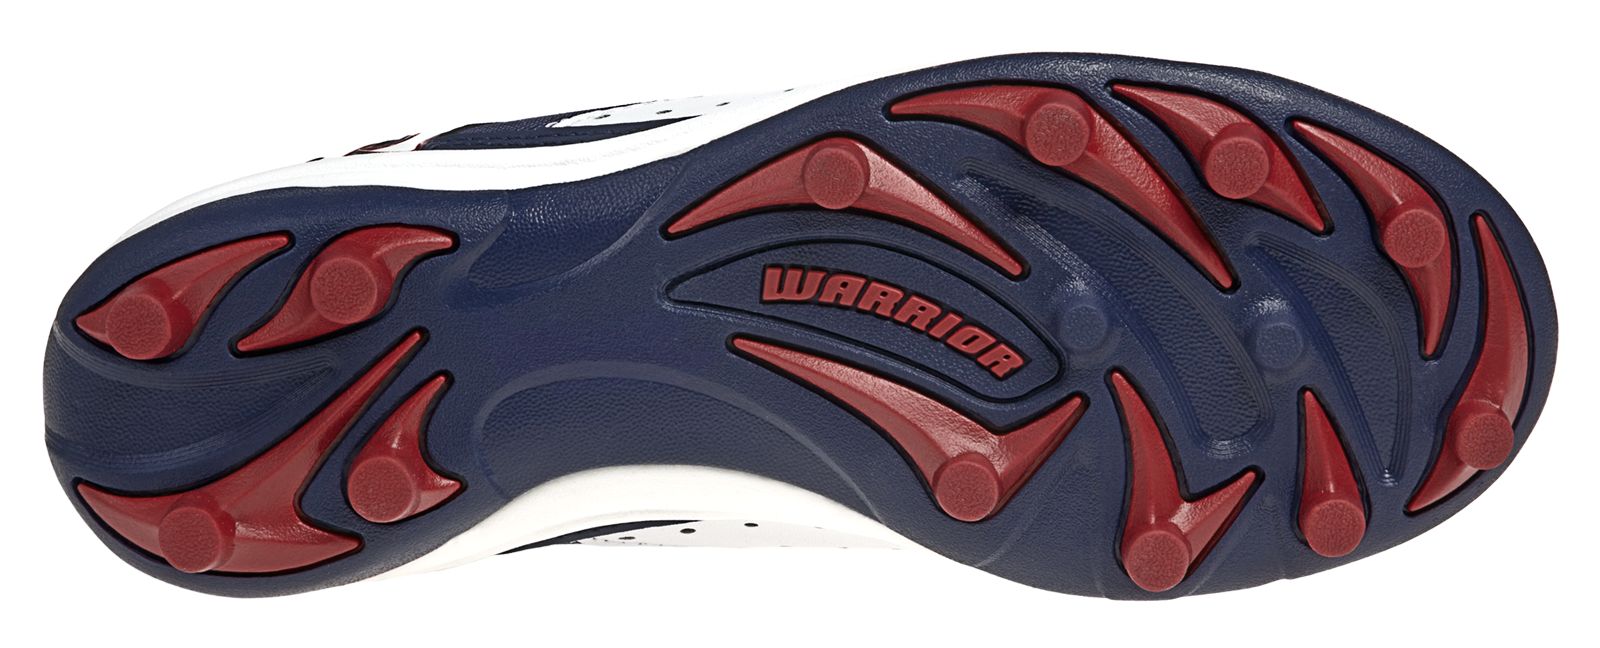 Youth Vex Cleat - Rabil Edition, White with Blue & Red image number 5